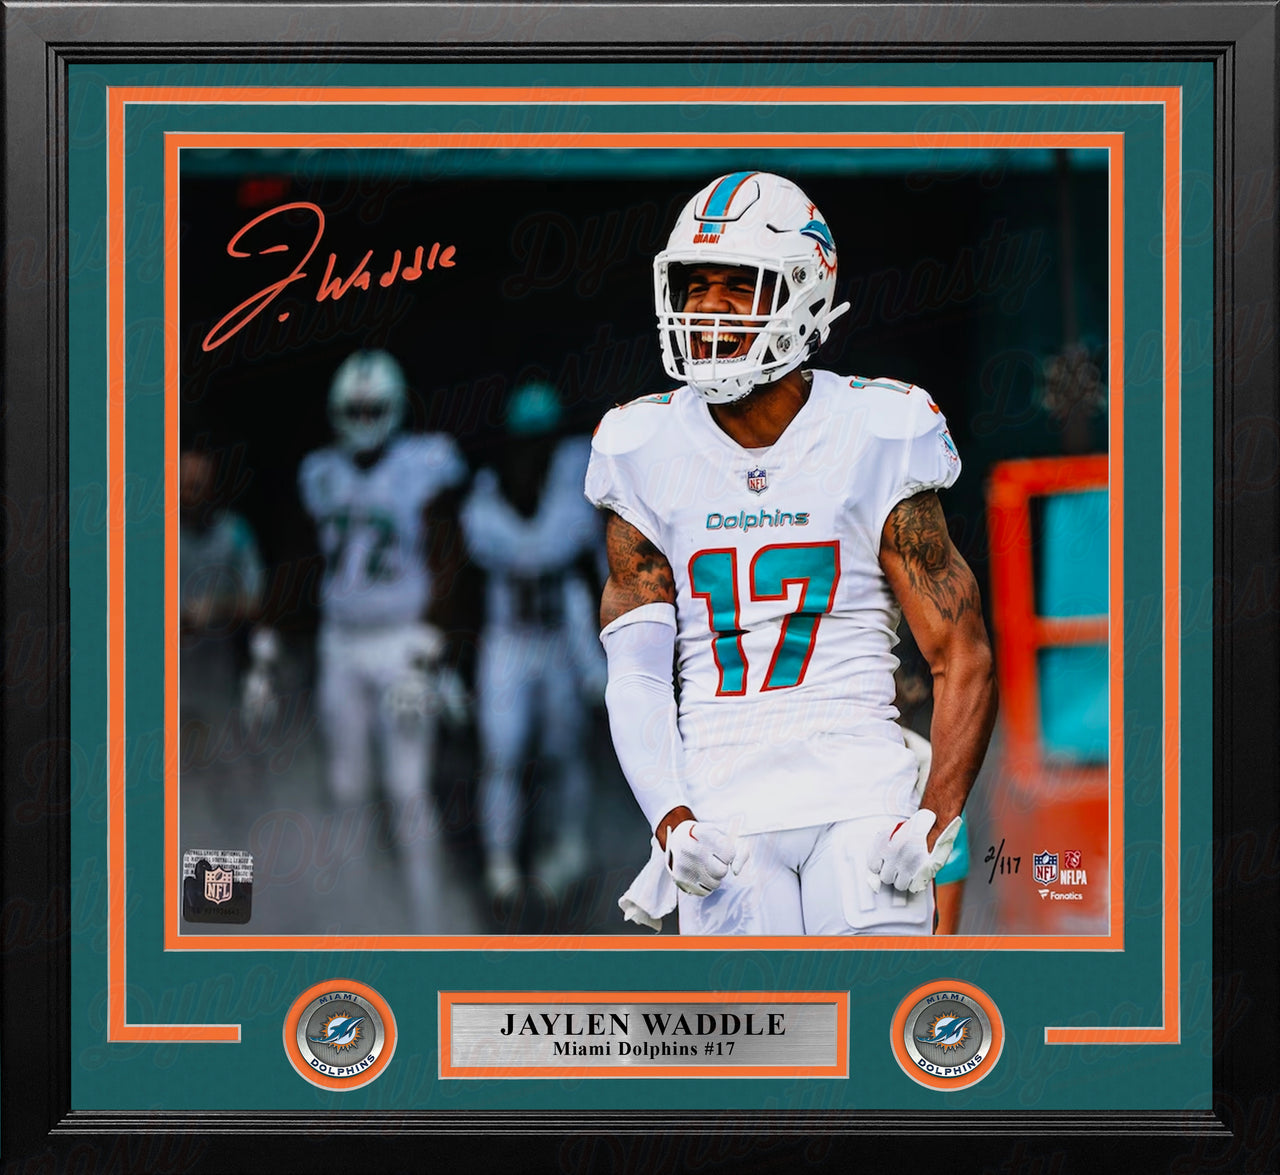 Jaylen Waddle Scream Miami Dolphins Autographed 11" x 14" Framed Football Photo Numbered to 117